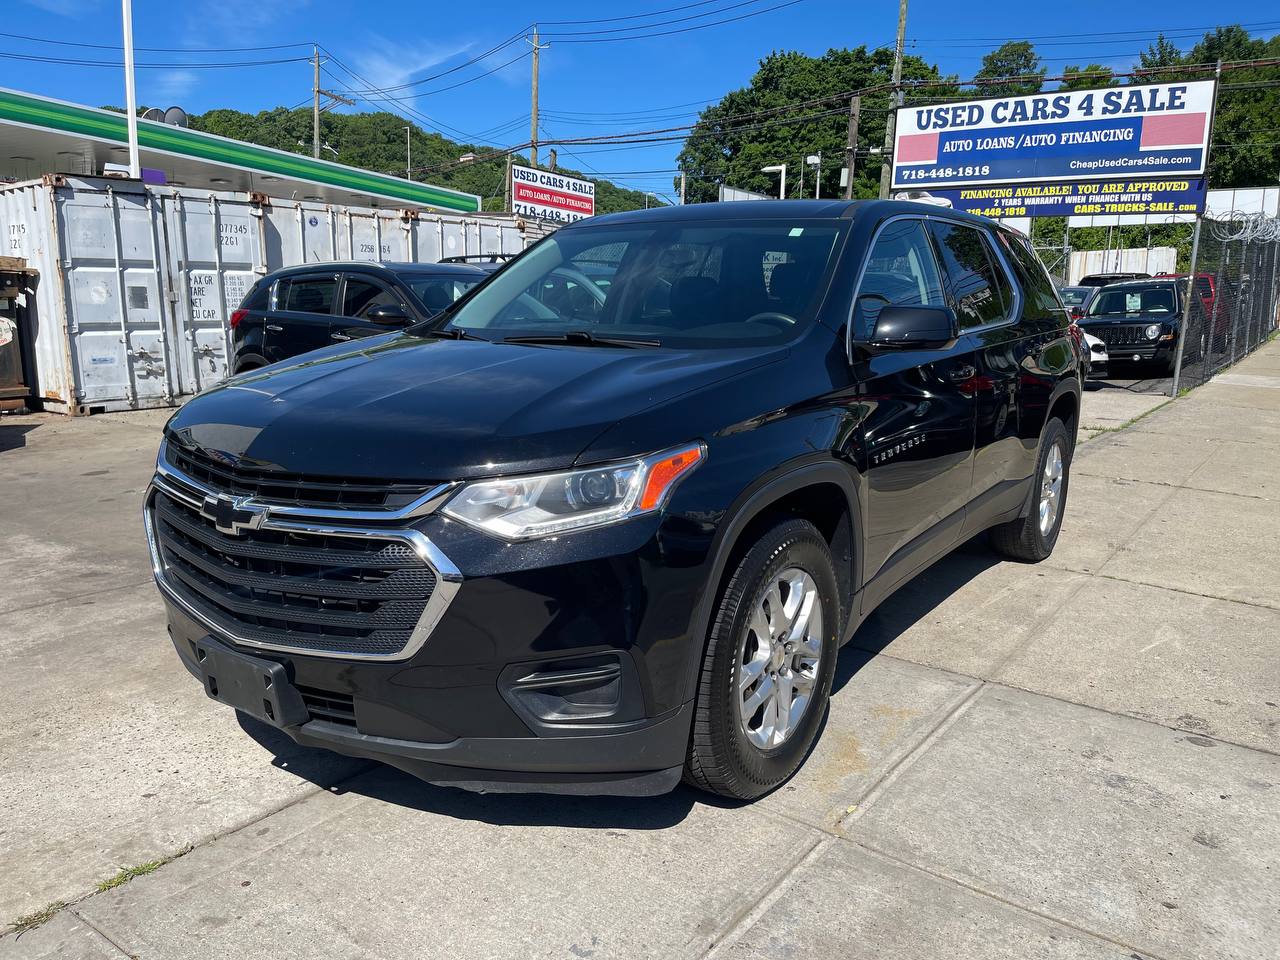 Used Car - 2019 Chevrolet Traverse LS 4x4 for Sale in Staten Island, NY